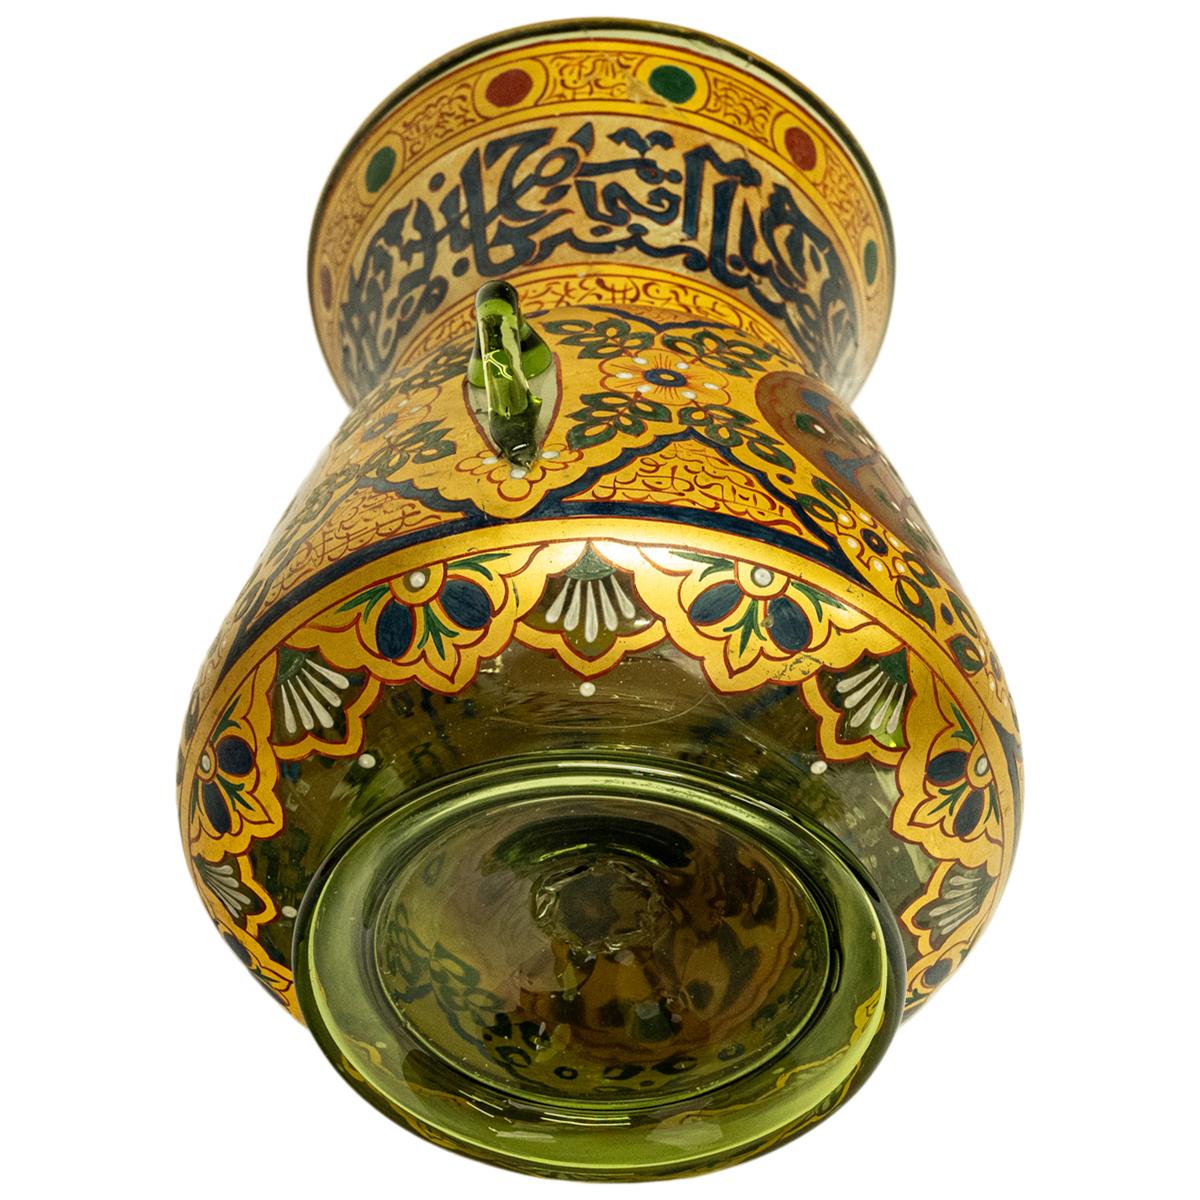 Antique French Islamic Glass Enamel Gilt Mamluk Revival Mosque Lamp Brocard 1880 For Sale 9